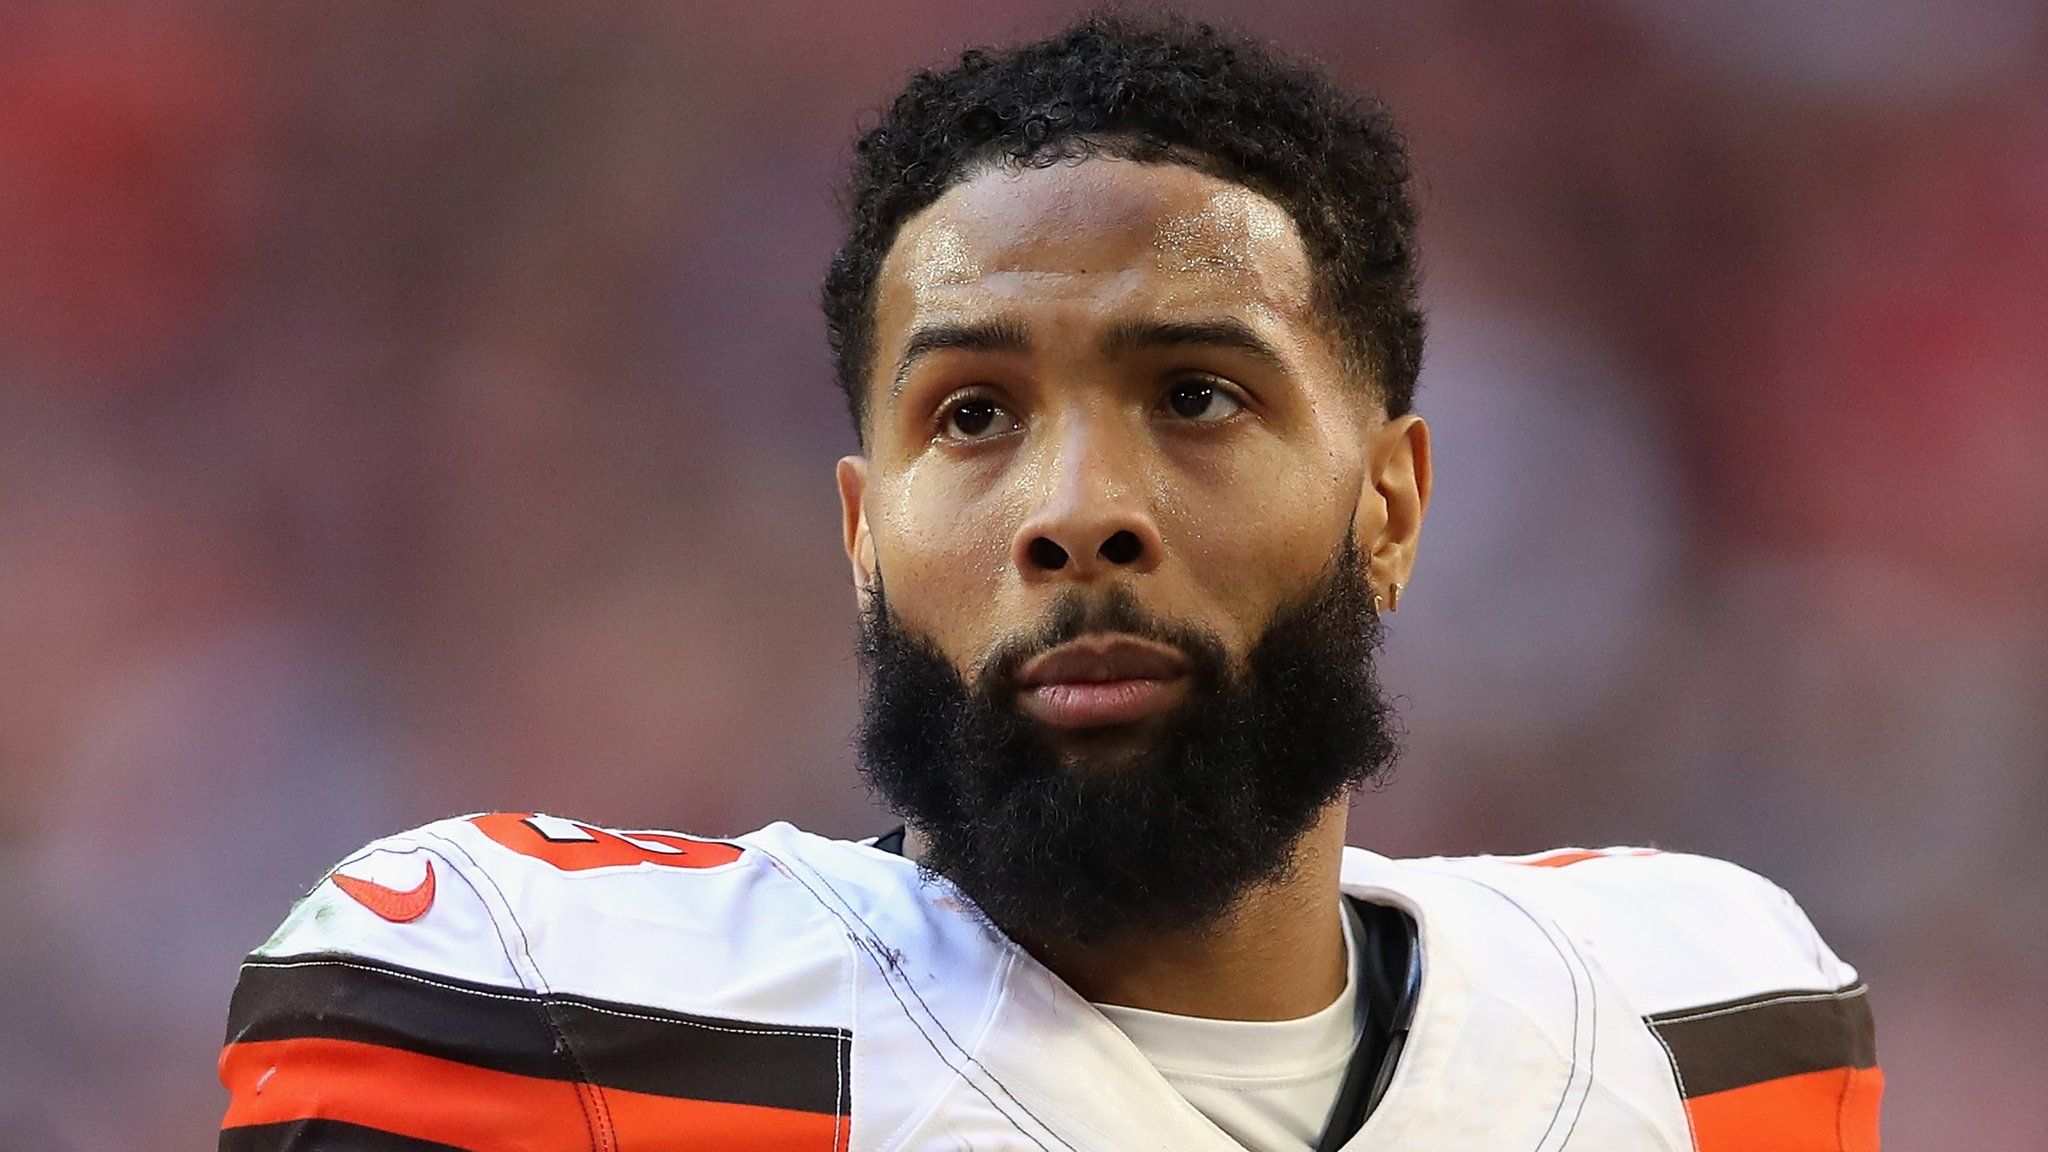 Cleveland Browns wide receiver Odell Beckham Jr looks on during an NFL game